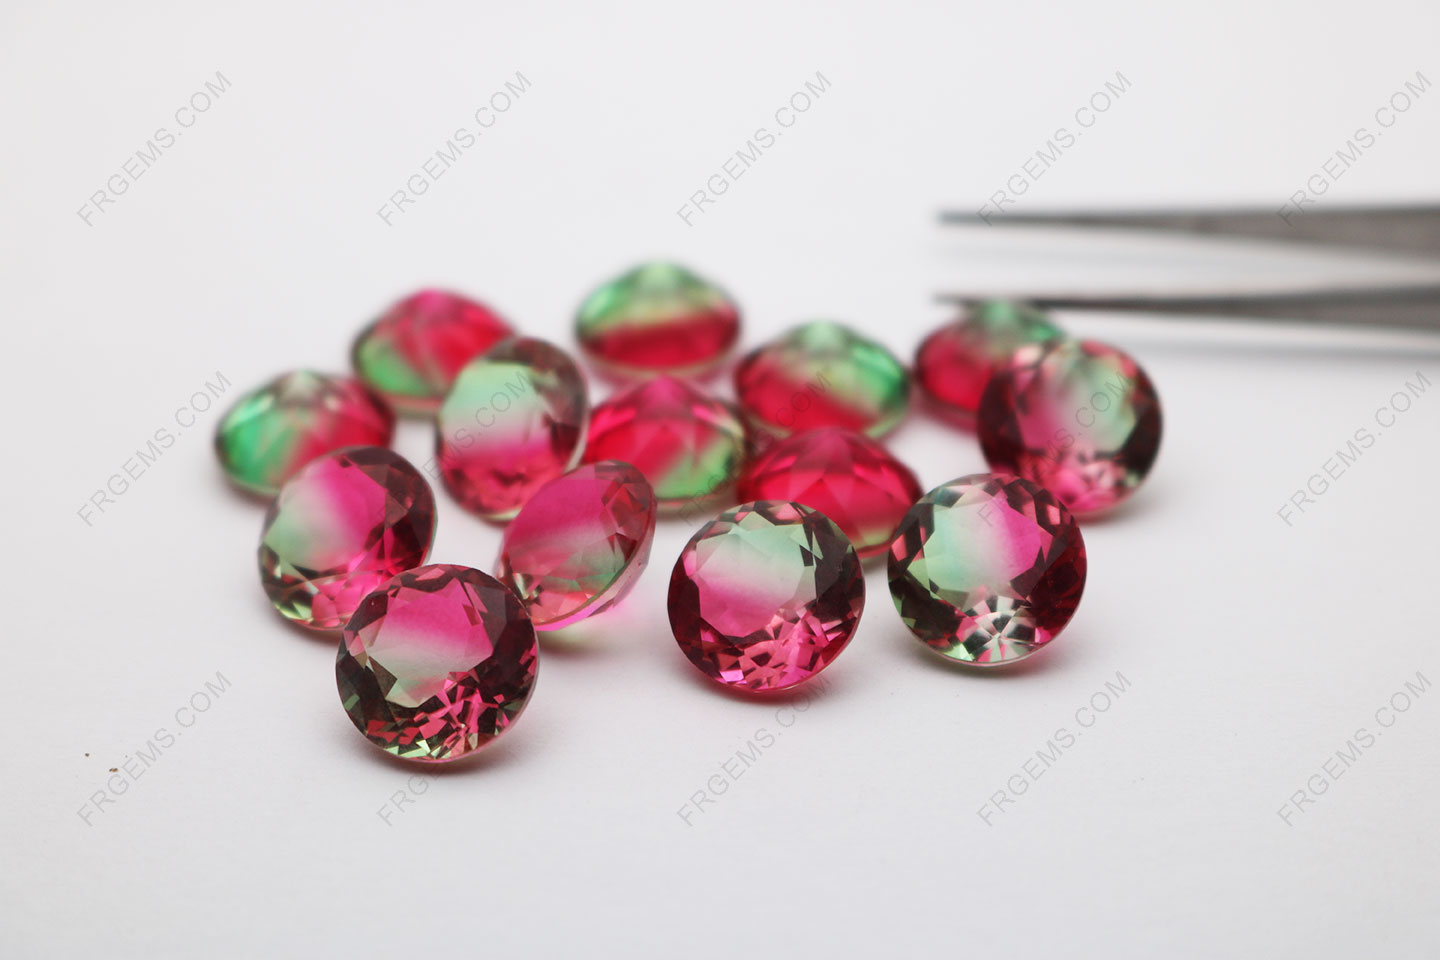 Synthetic Watermelon Tourmaline Glass BiColor BX04 Round Faceted 12mm Loose gemstones wholesale gemstones